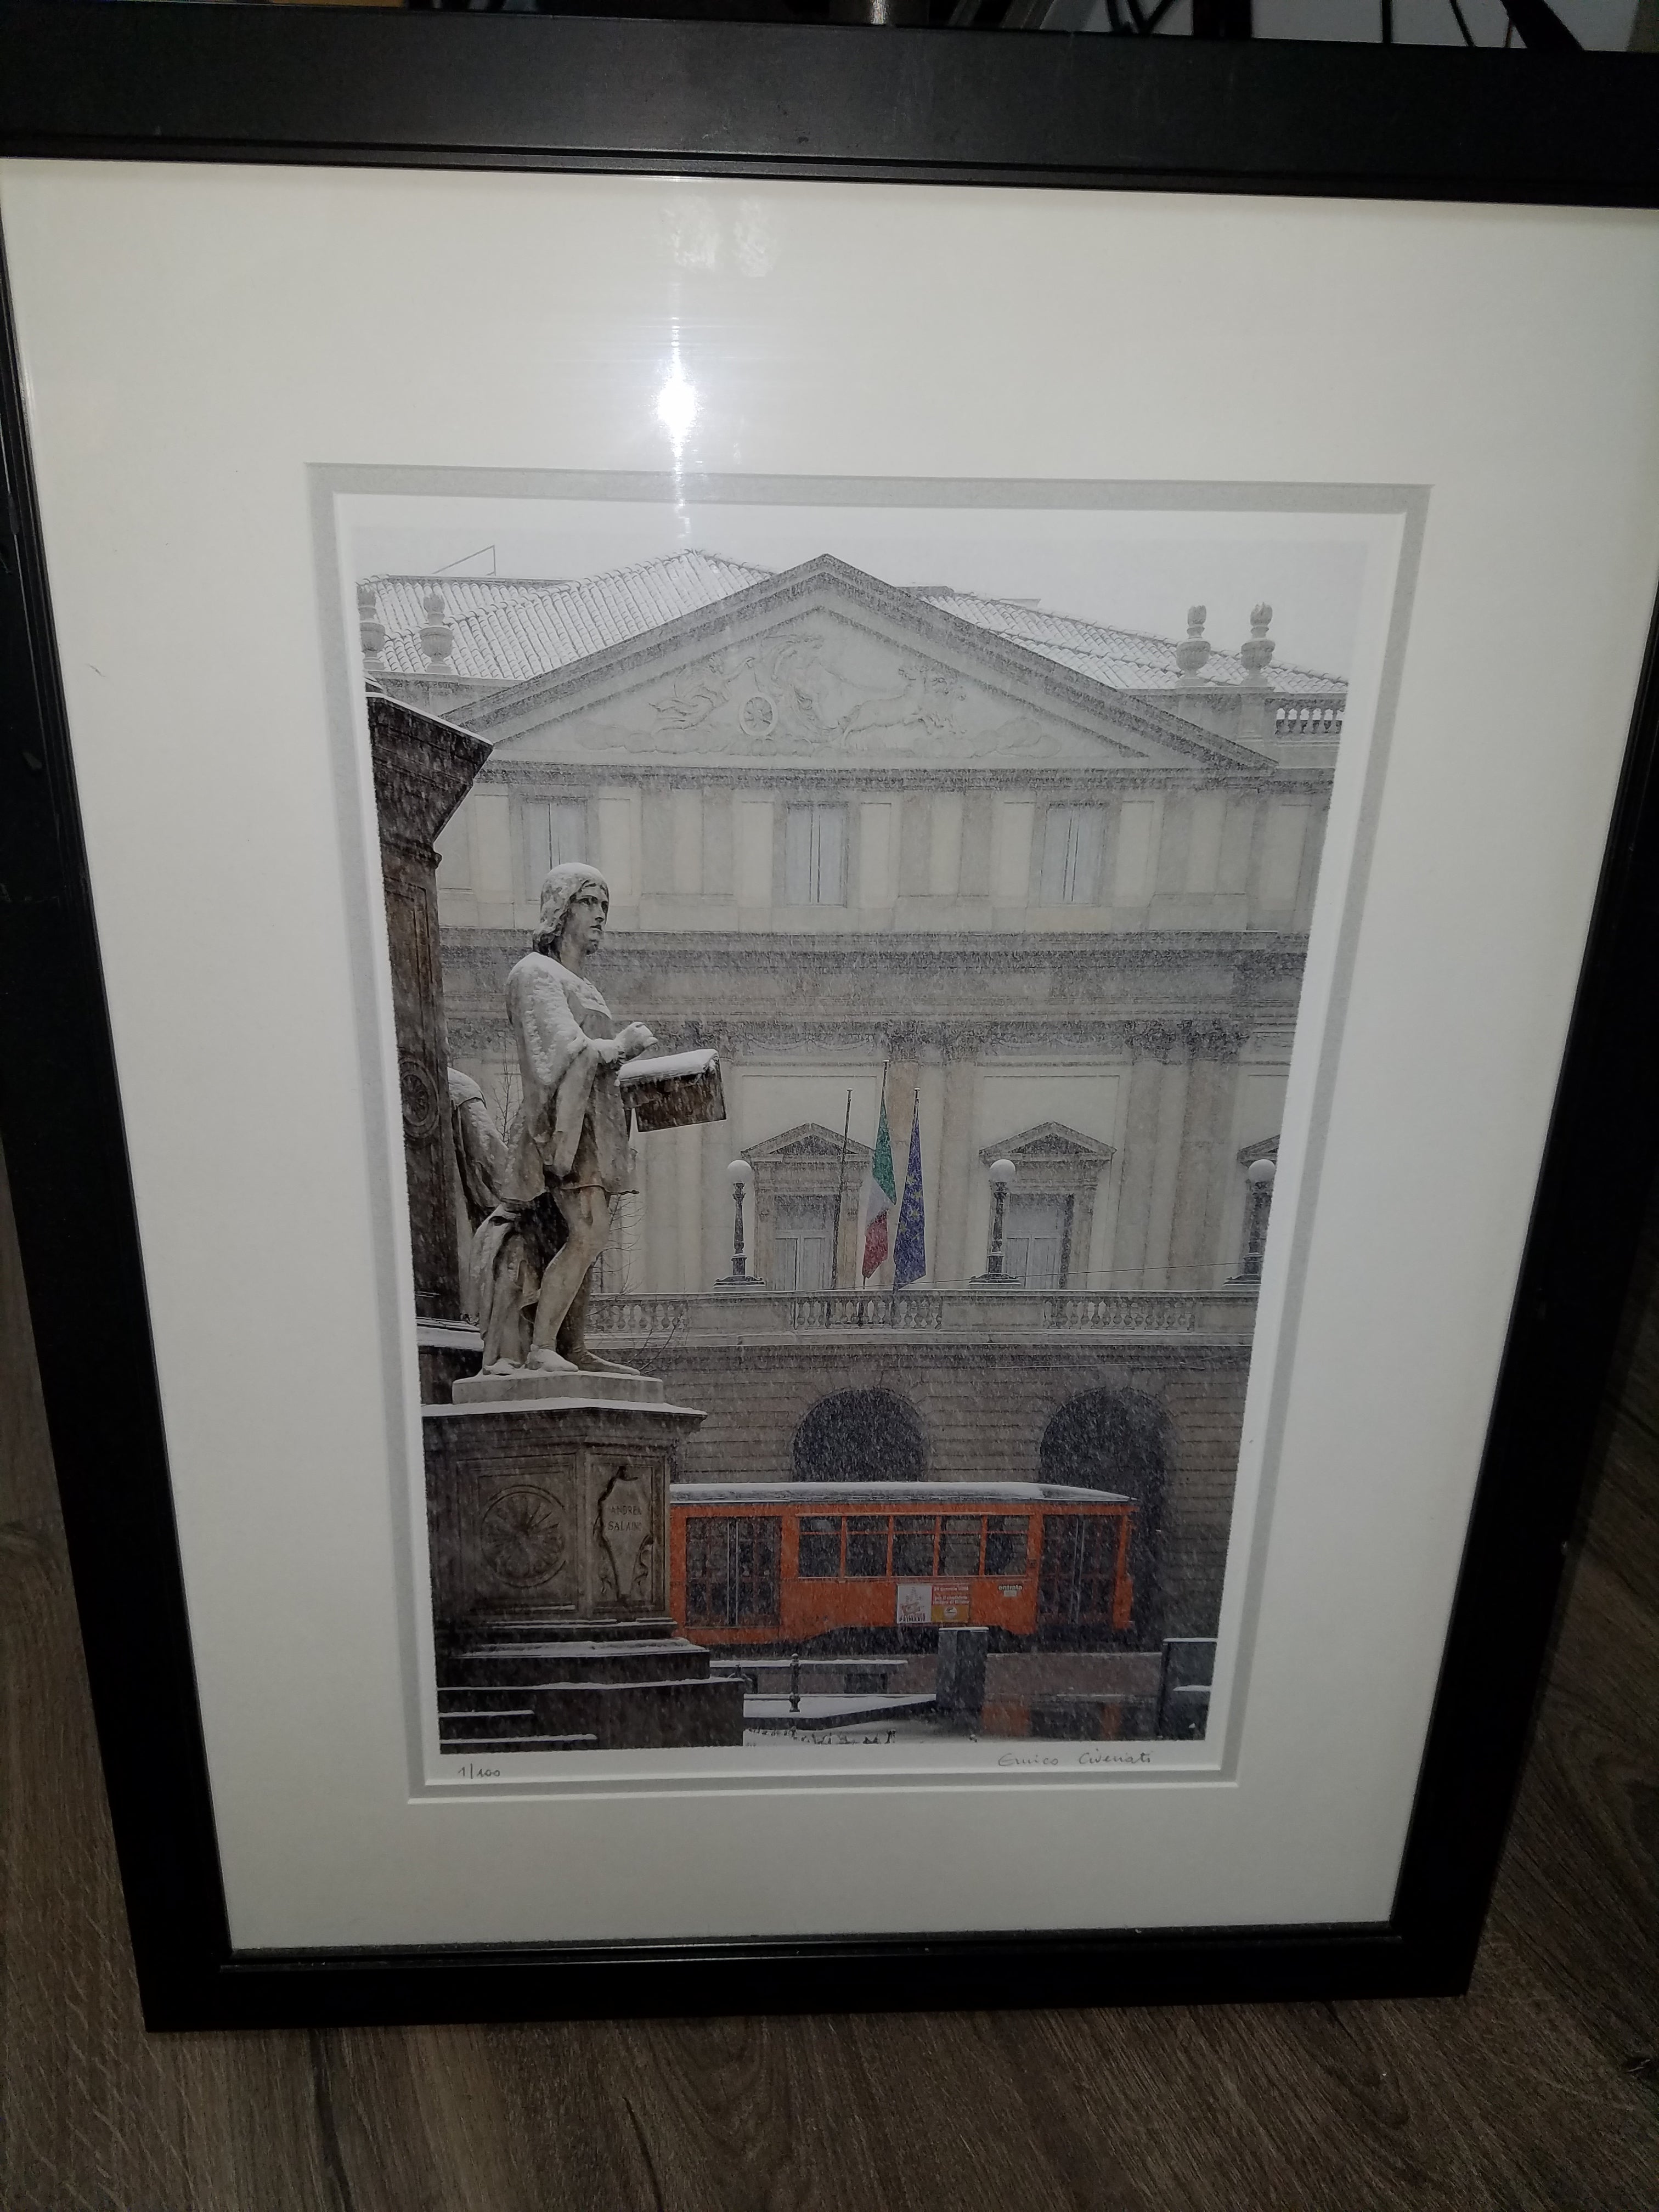 Title:  Enrico Civeriati Fine Art Photography - Teatro Alla Scala - Framed  Artist:  Enrico Civeriati  Edition:  xx/100 s/n  Type:  Photograph  Size:  19" x 25"  Location:  Milano, Italy  Notes:  Framed in very good condition.  Frame has minimal scuffing, see photos for reference.  Incredibly limited edition of only 100 copies total, signed and numbered by the artist  In house and ready to ship!